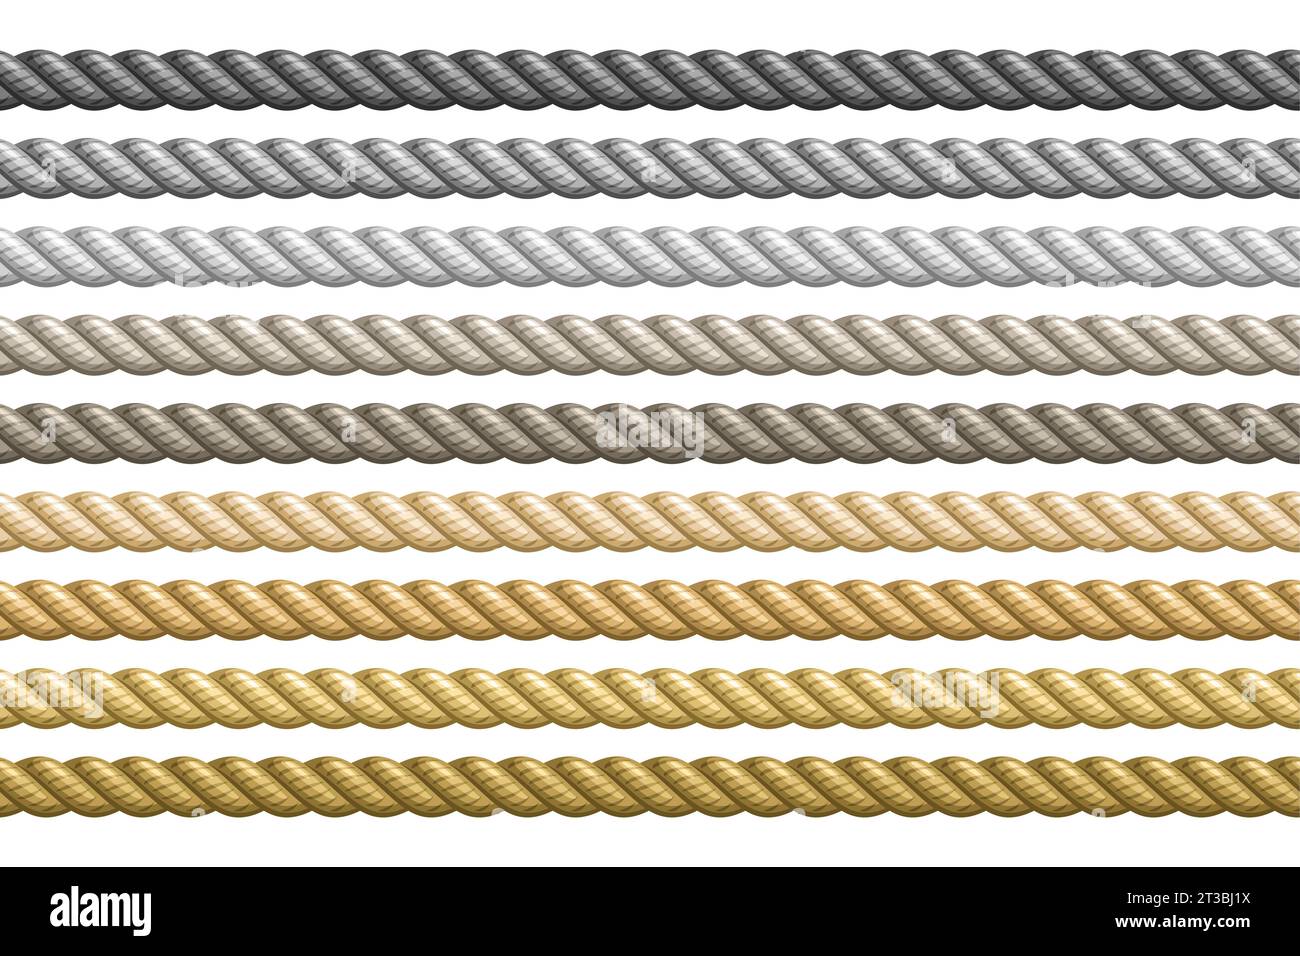 Vector Seamless Rope Set, group of illustration horizontal decorative gray and yellow long ropes, collection of many different vintage plastic ropes o Stock Vector